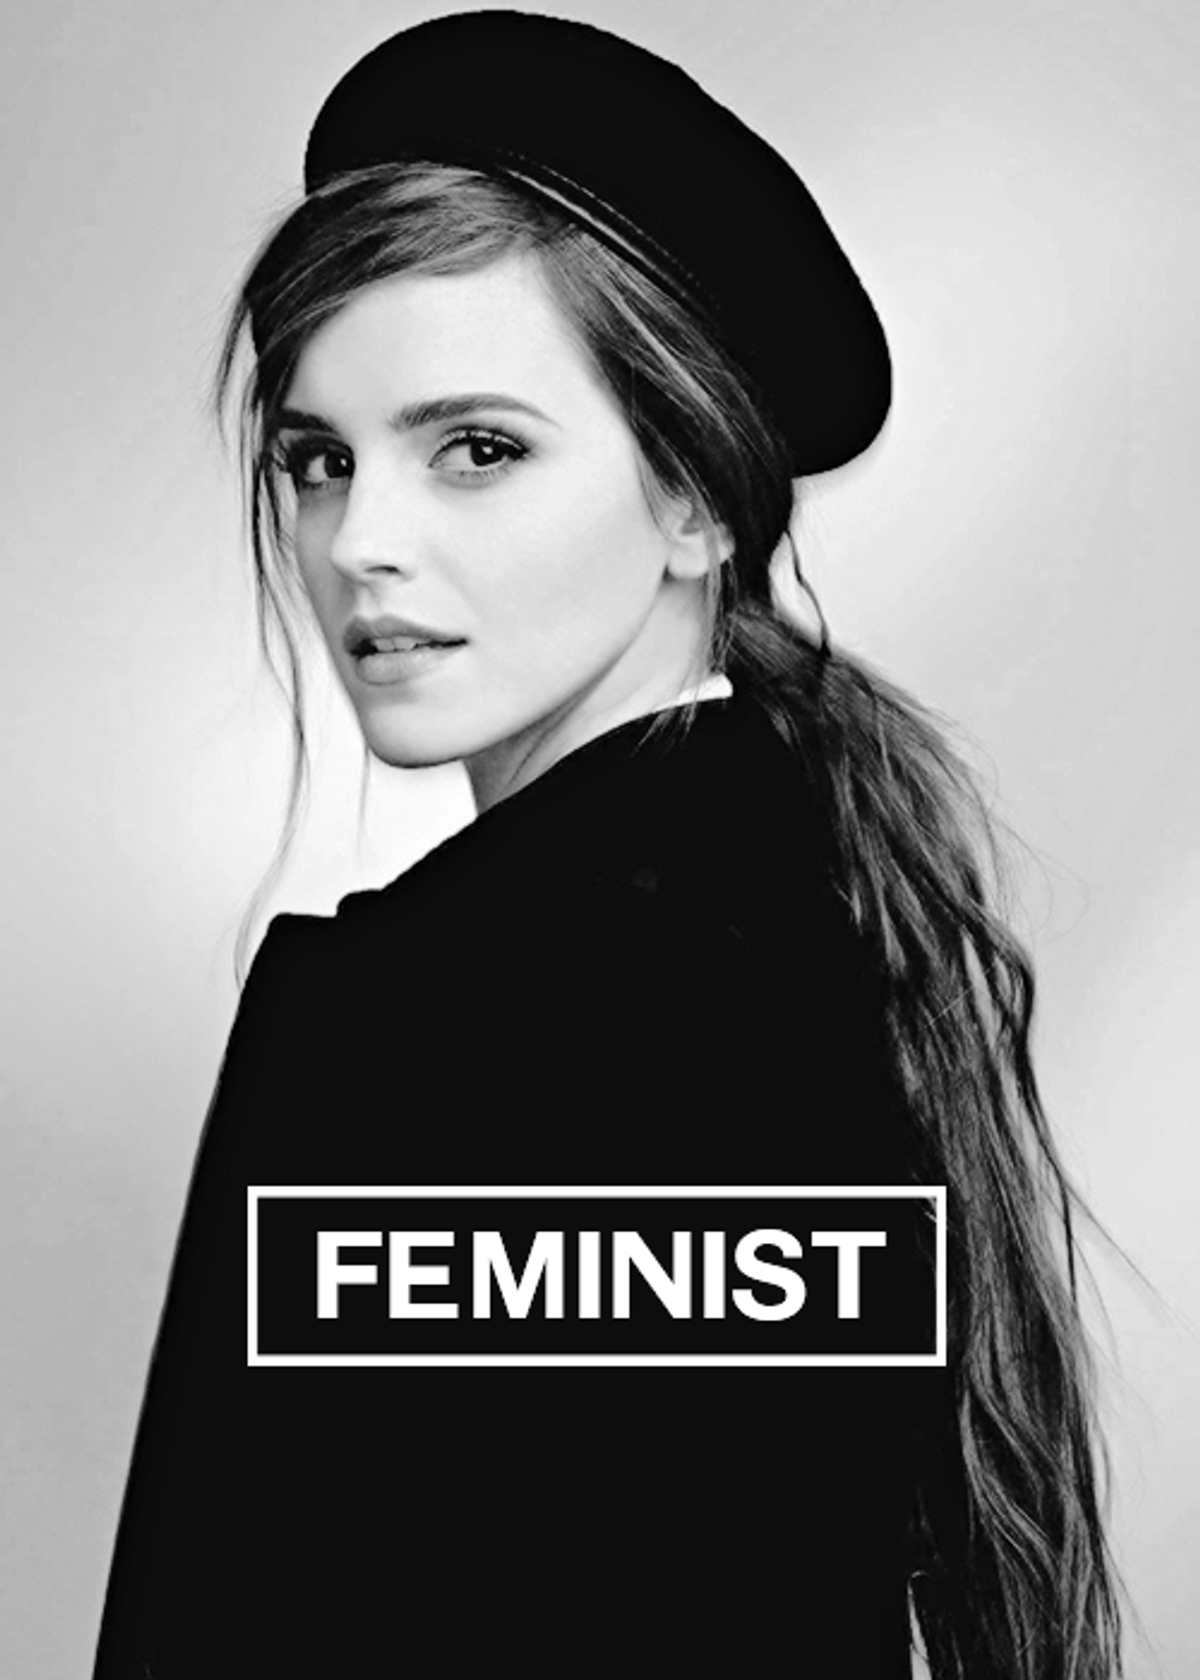 A Response To "I Am Not A Feminist"